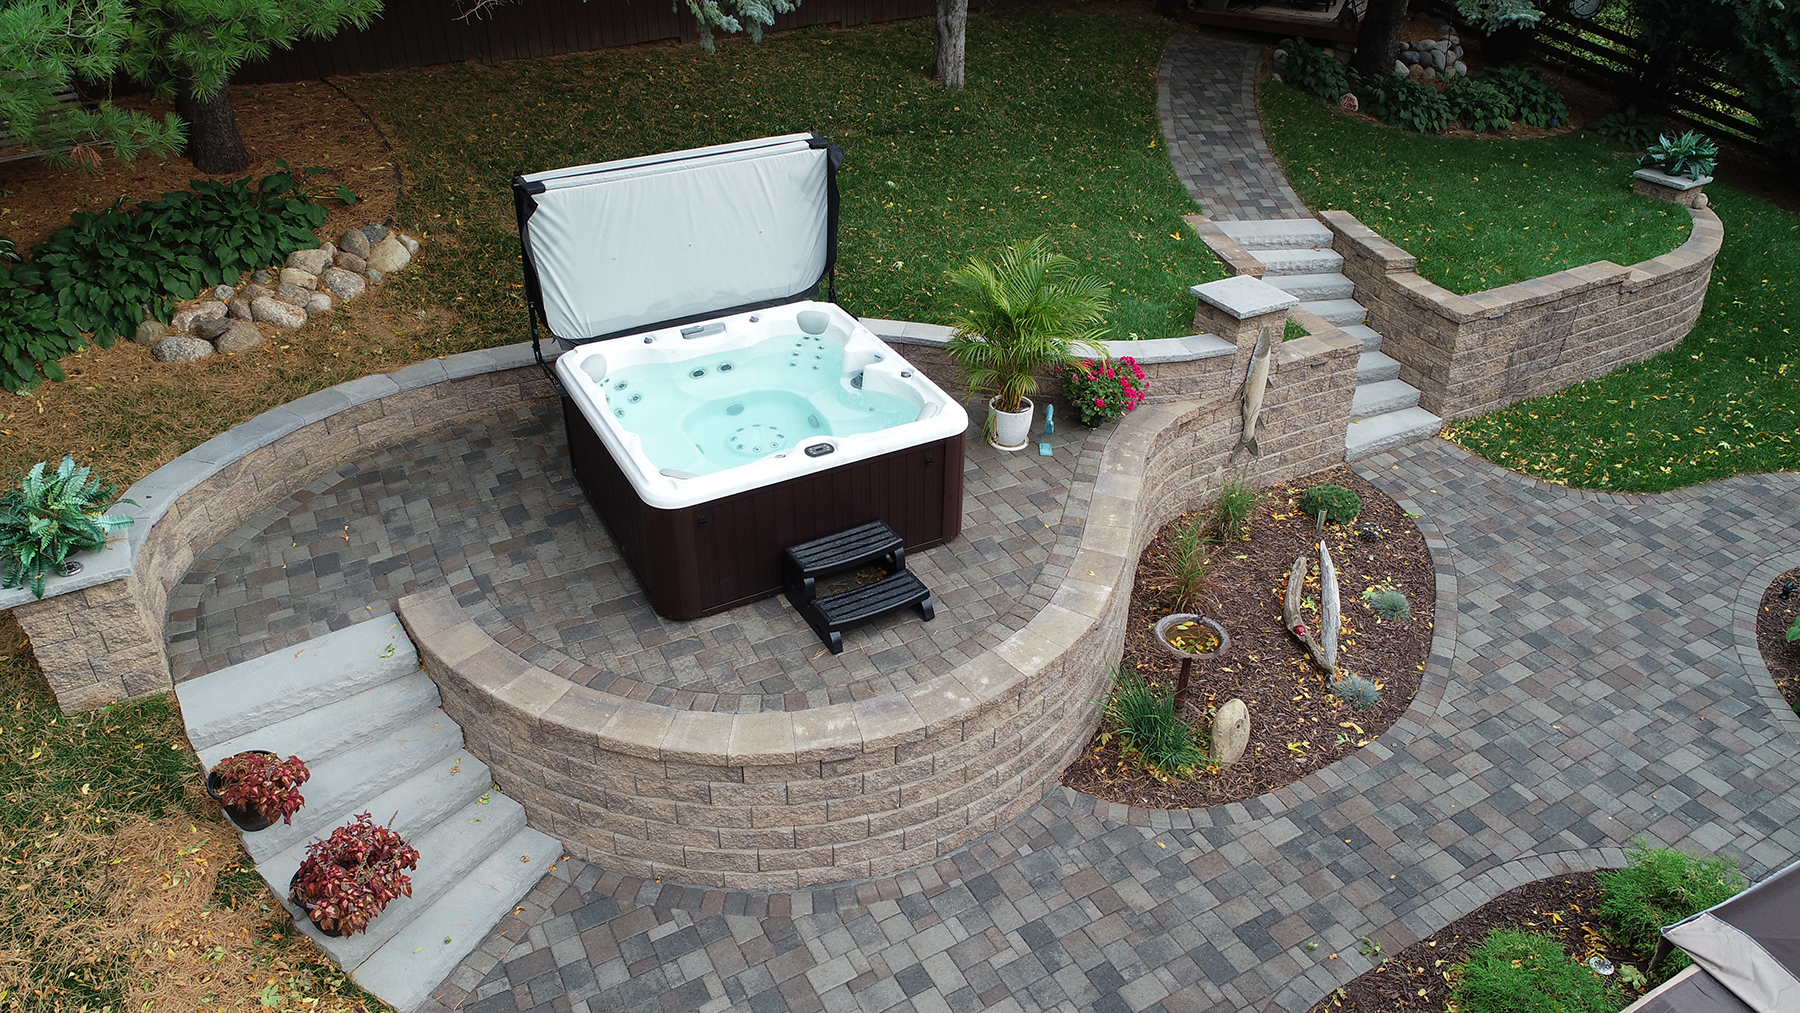 Raised Patio for a Hot Tub